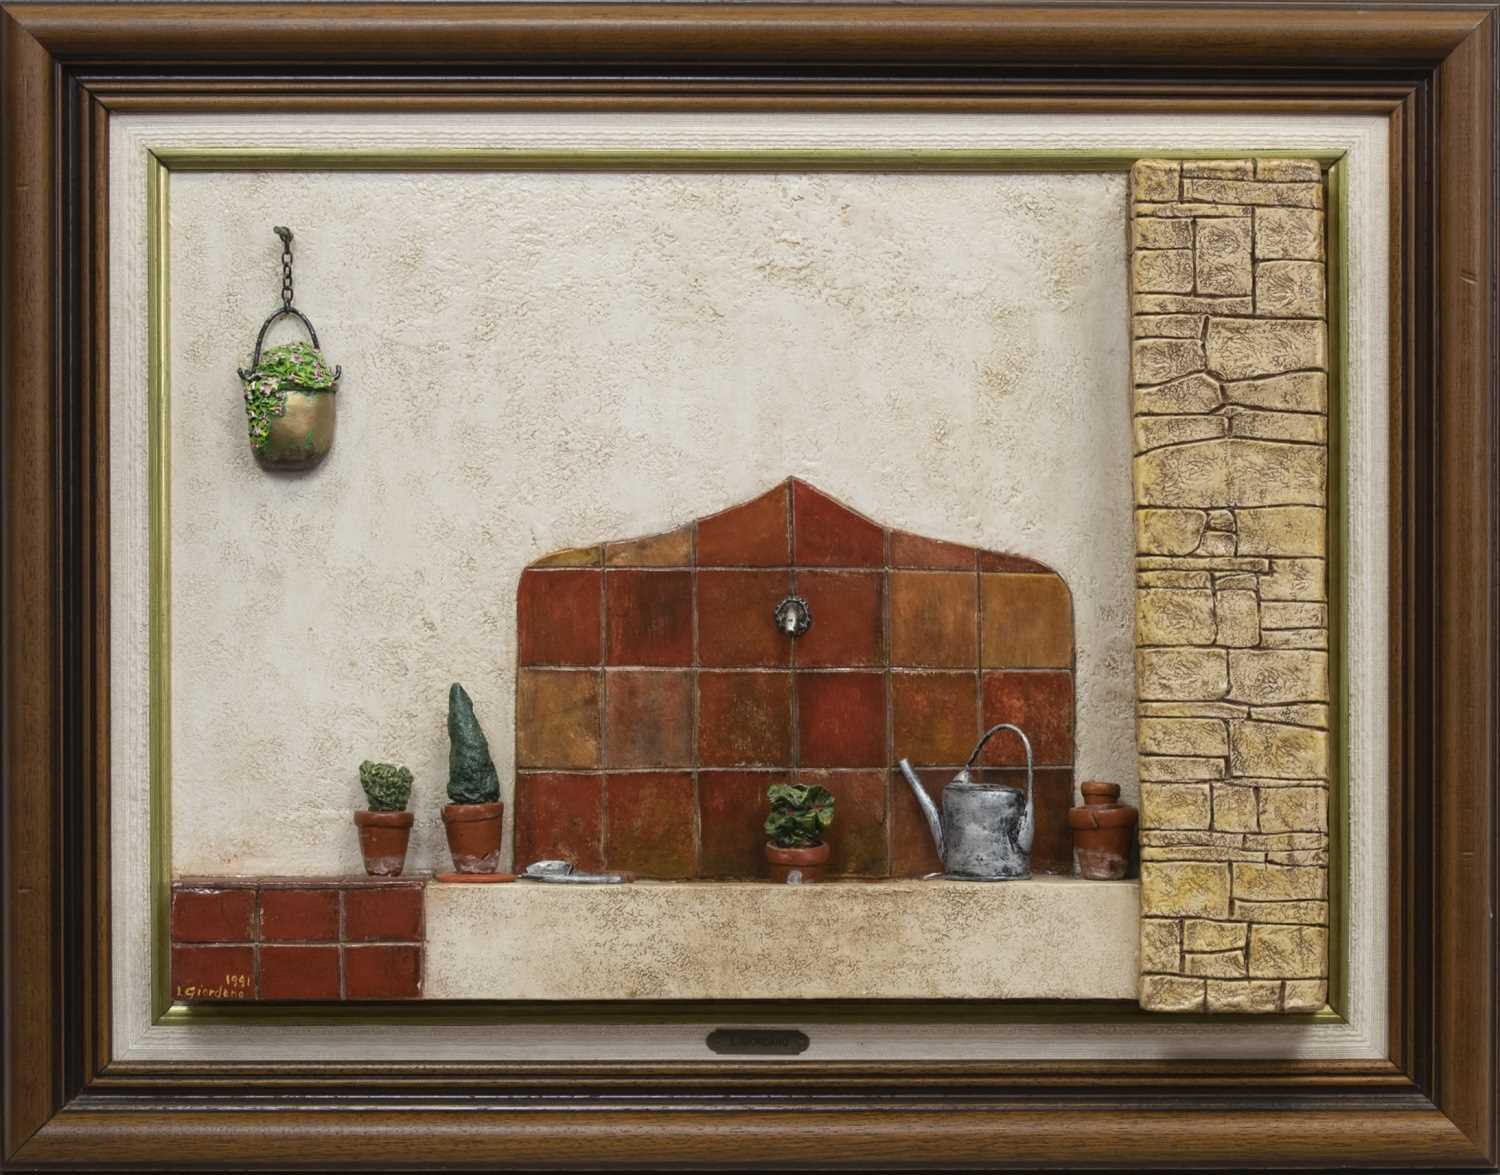 Lot 623 - LA PETITE FONTAINE, A MIXED MEDIA CONSTRUCTION BY LOUIS GIORDANO